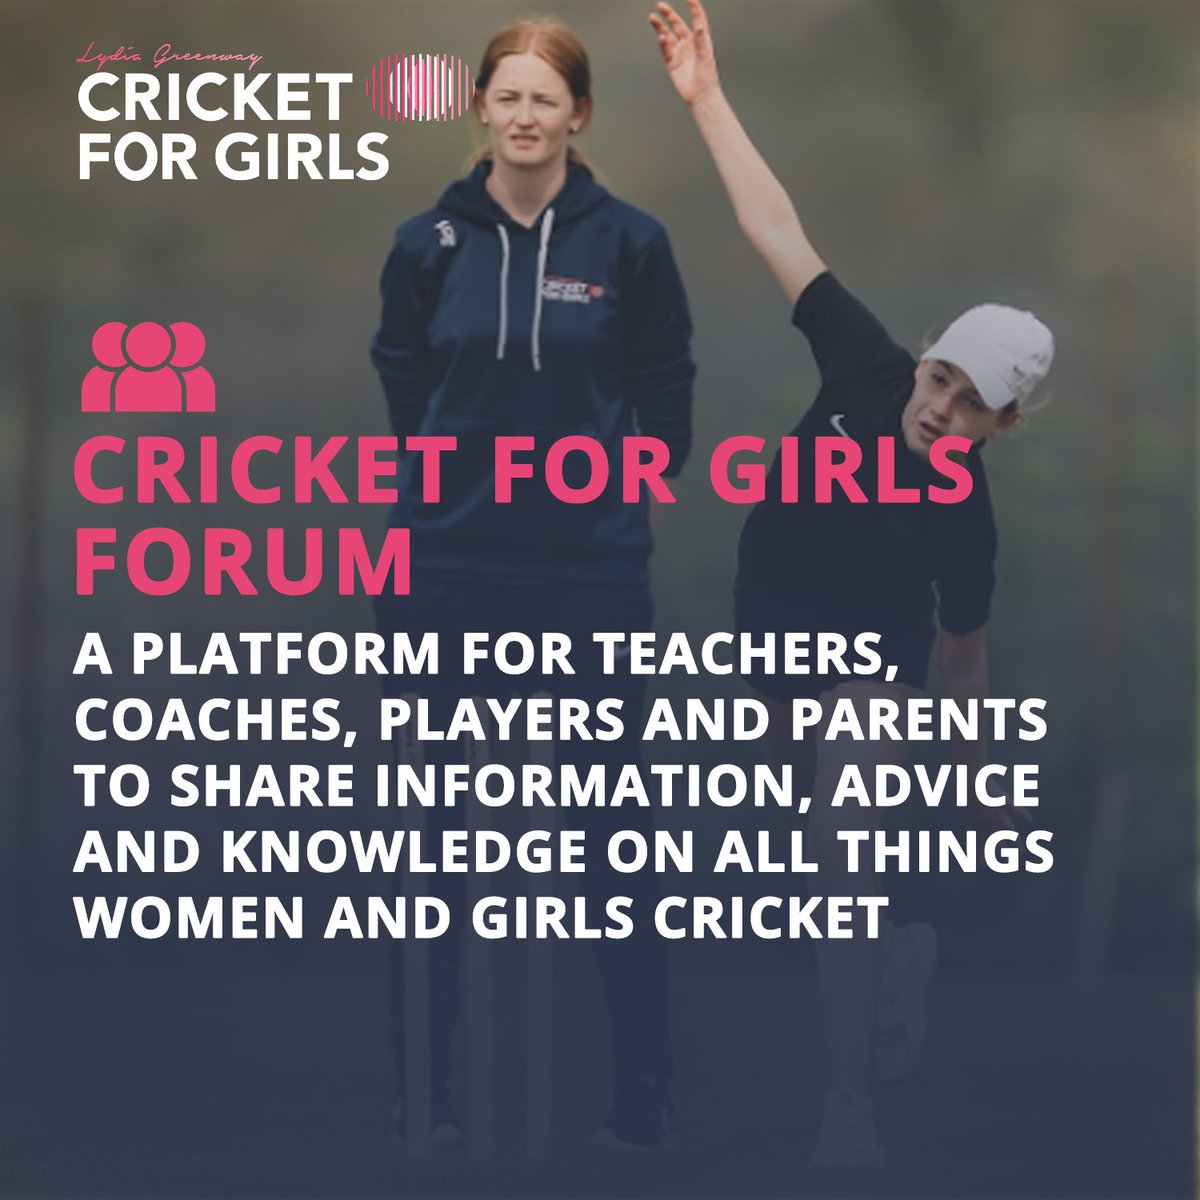 🌟 Have you joined our Cricket for Girls Community Forum? 🏏 With the new season underway, it's the perfect time to connect with fellow cricket enthusiasts! 🤝 Share fixtures, events, coaching tips, and more. Join now: cricketforgirls.com/community/xenf…